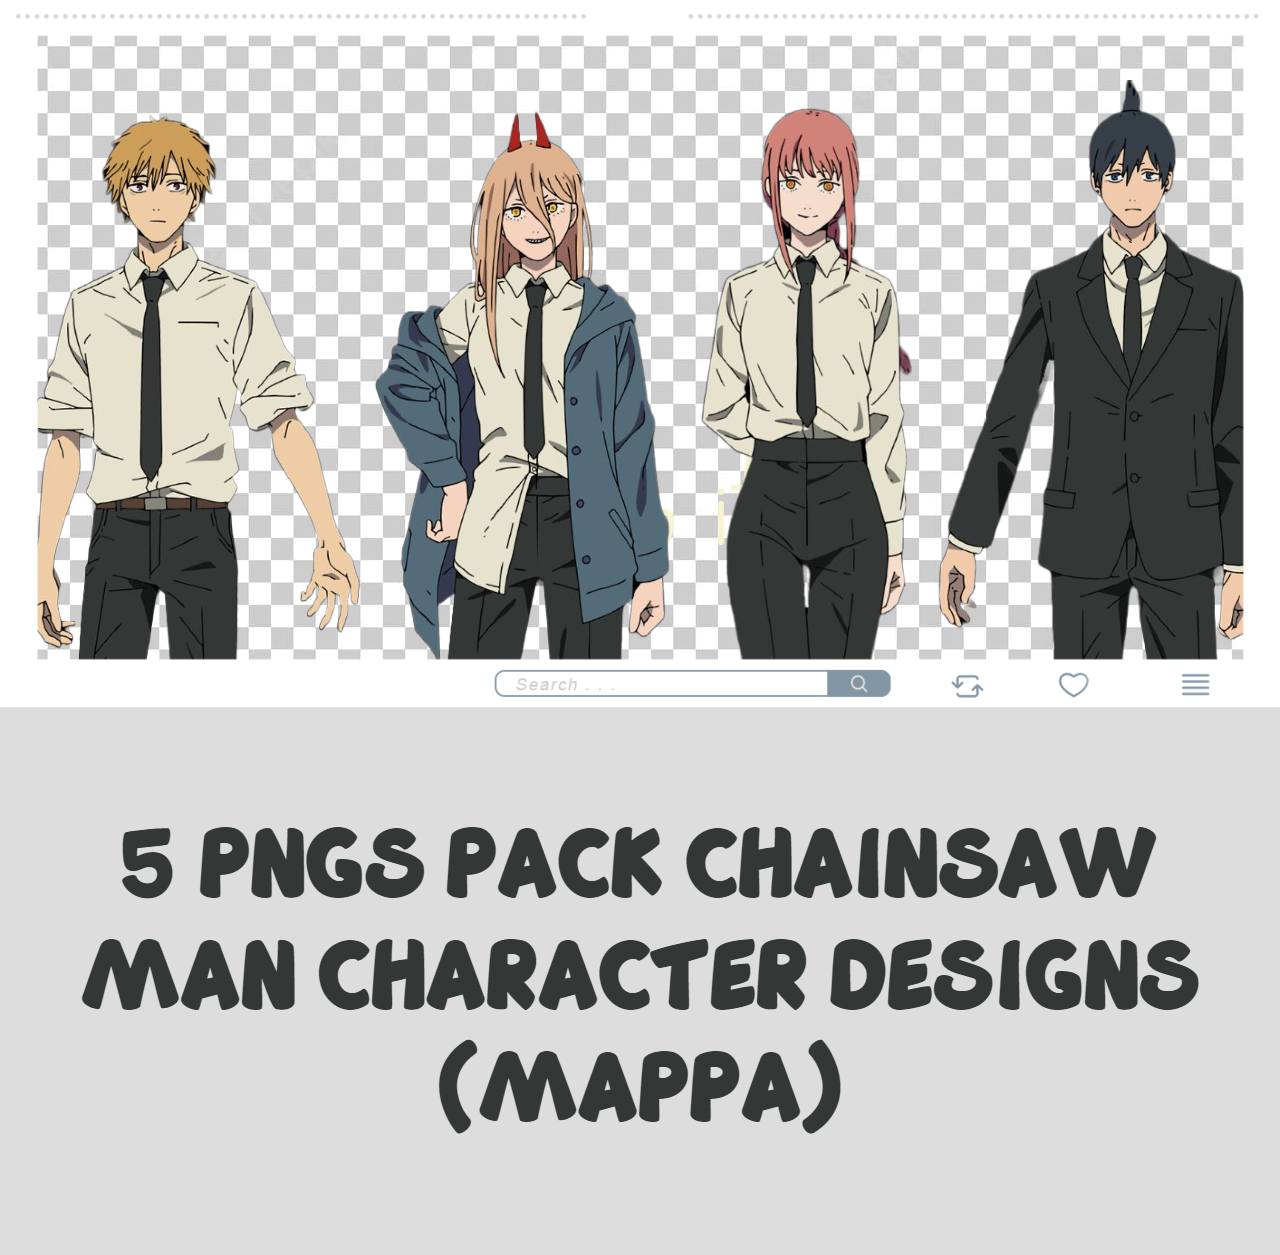 PNG PACK CHAINSAW MAN CHARACTER DESIGNS (MAPPA) by starcolors13 on